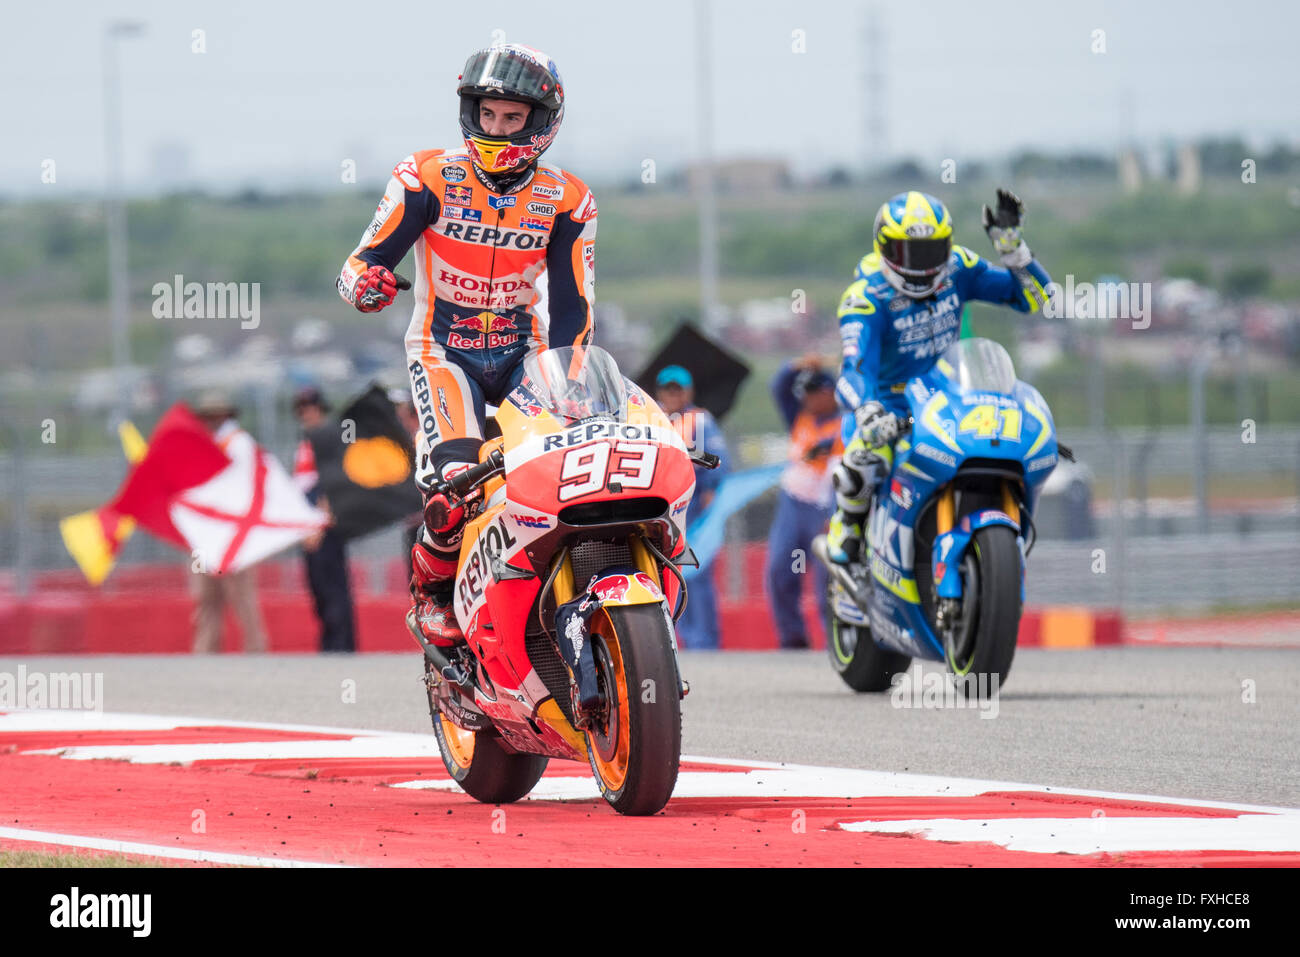 Marc Marquez of Repsol Honda Team seen during his victory lap after winning the 2016 Red Bull Grand Prix of the Americas Stock Photo